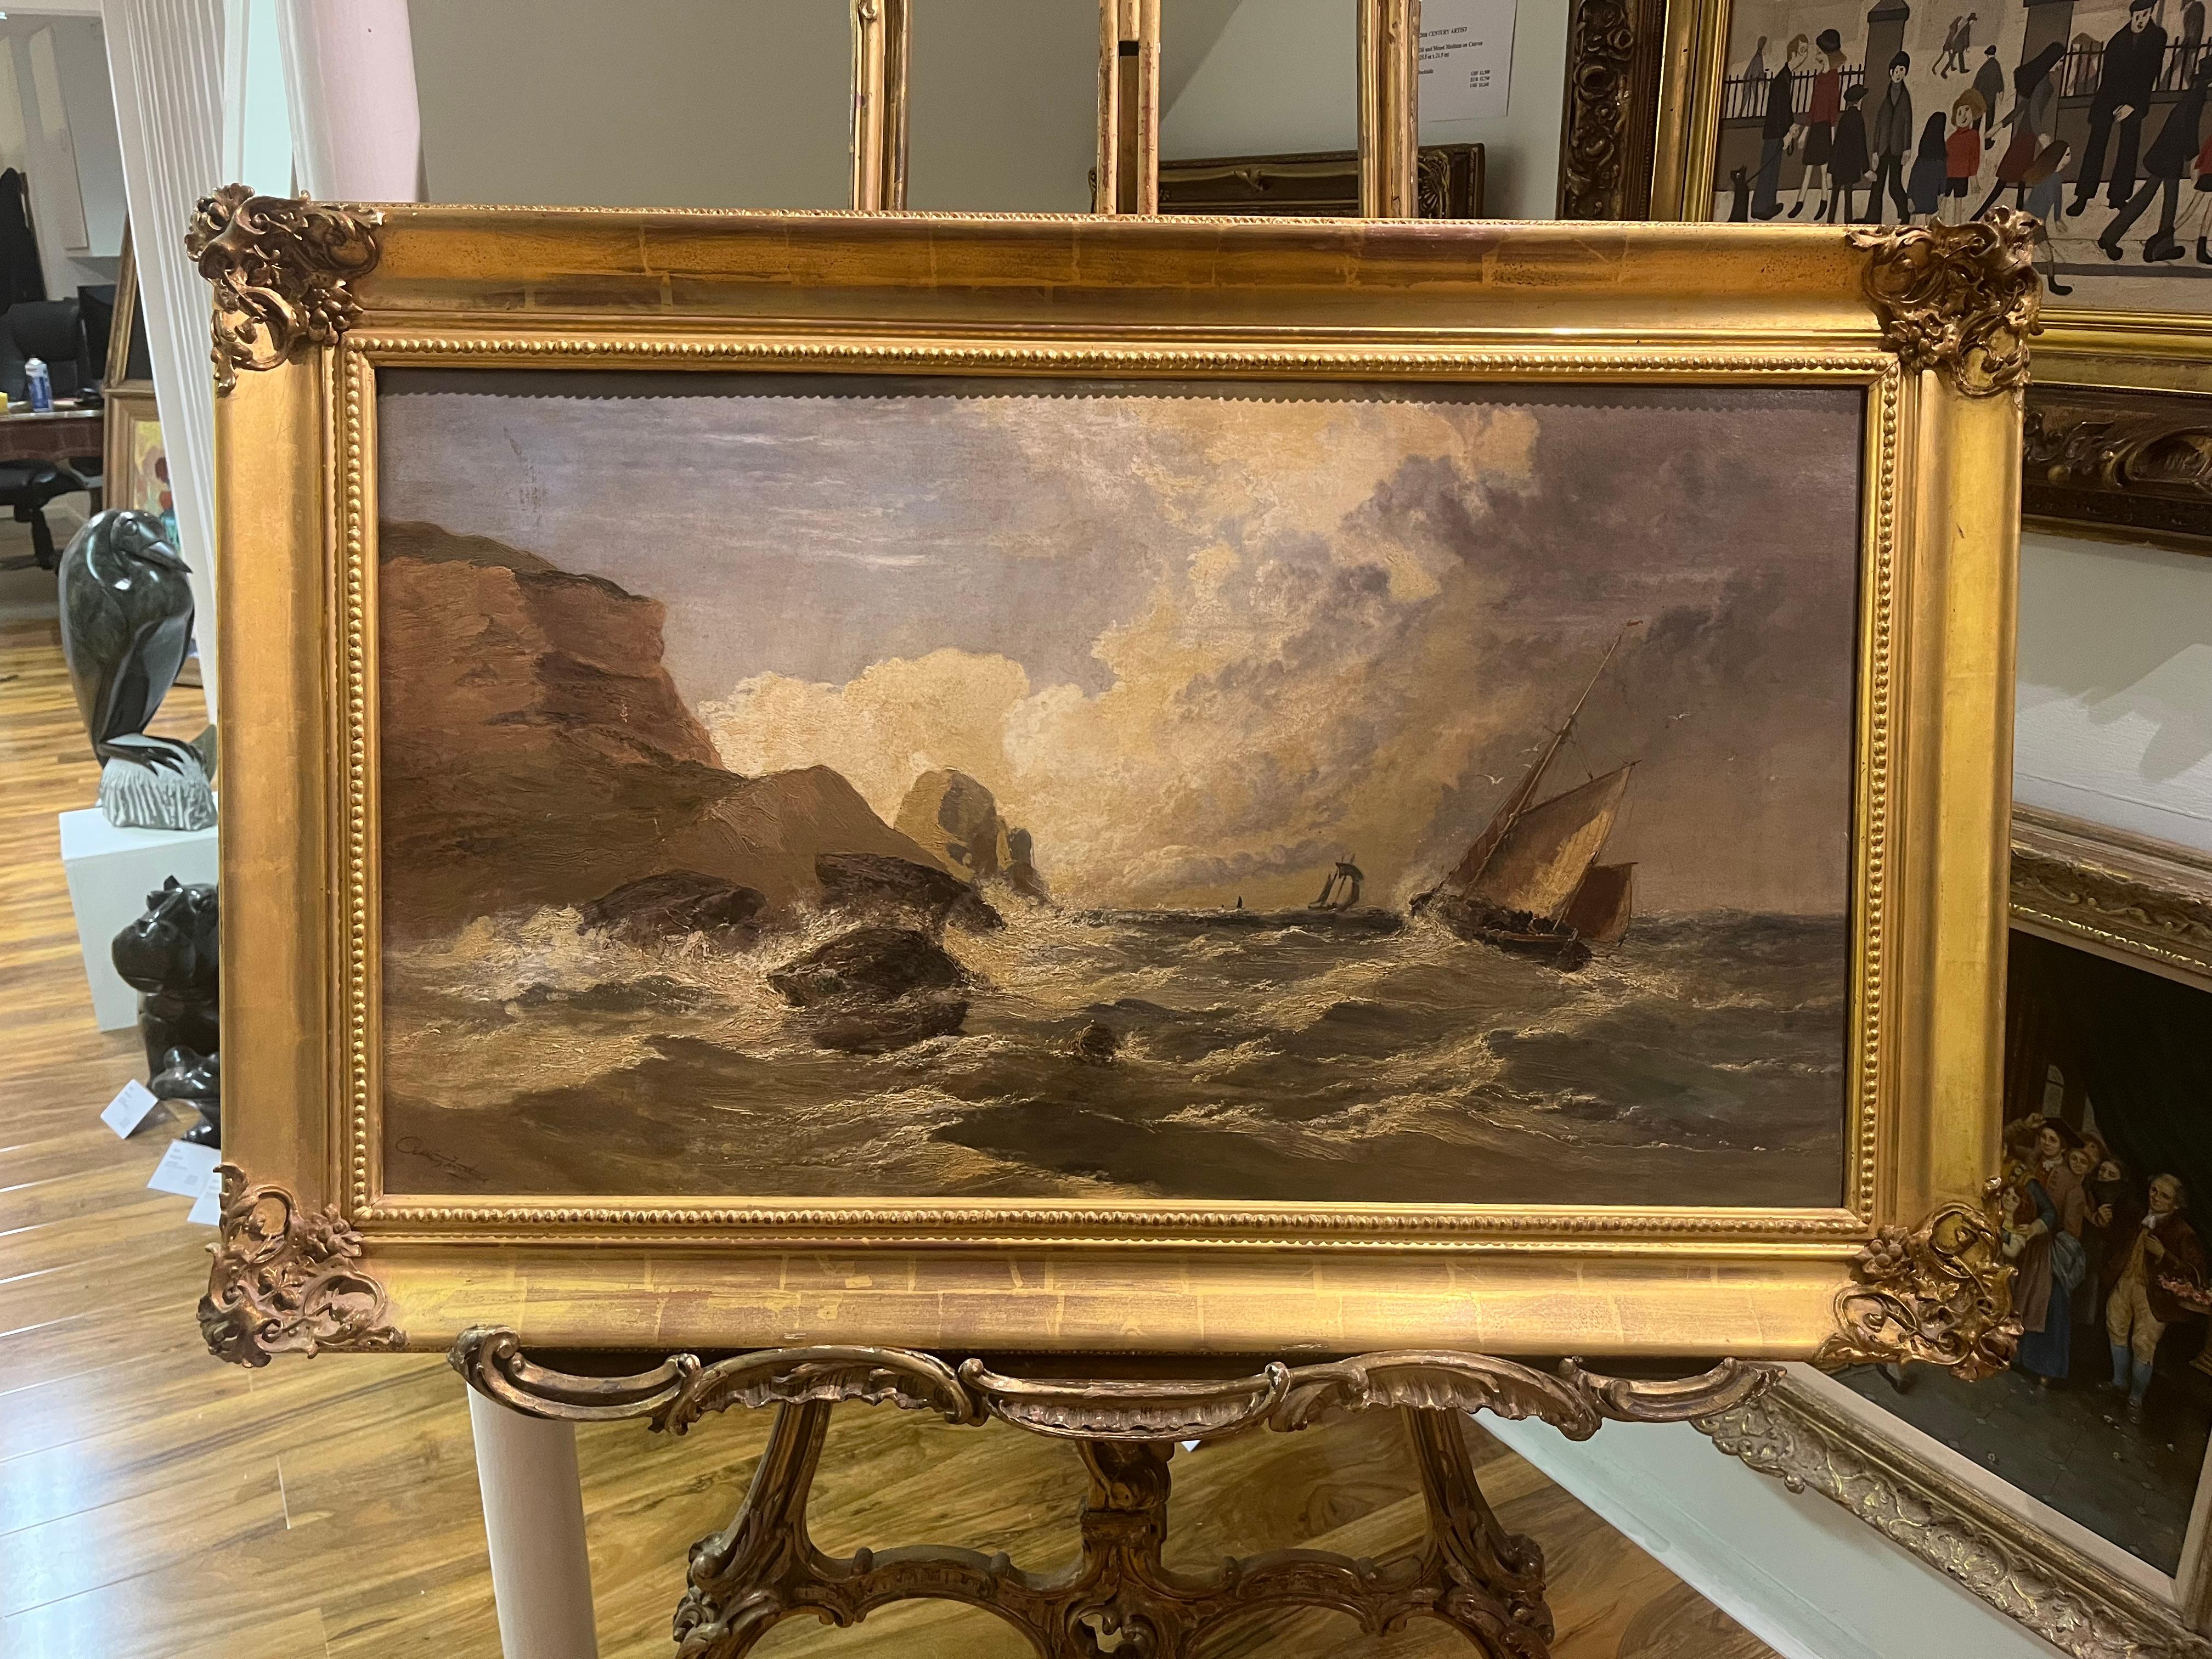 OIL PAINTING OLD MASTER ARTHUR MEADOWS (1843 - 1907) FINE 19th CENTURY BRITISH

Original Antique Large late 19th/early 20th Century British OLD MASTER OIL PAINTING Romantic Sea Scene GOLD GILT FRAME

NEW COLLECTION Of RARE PIECES OF ENGLISH